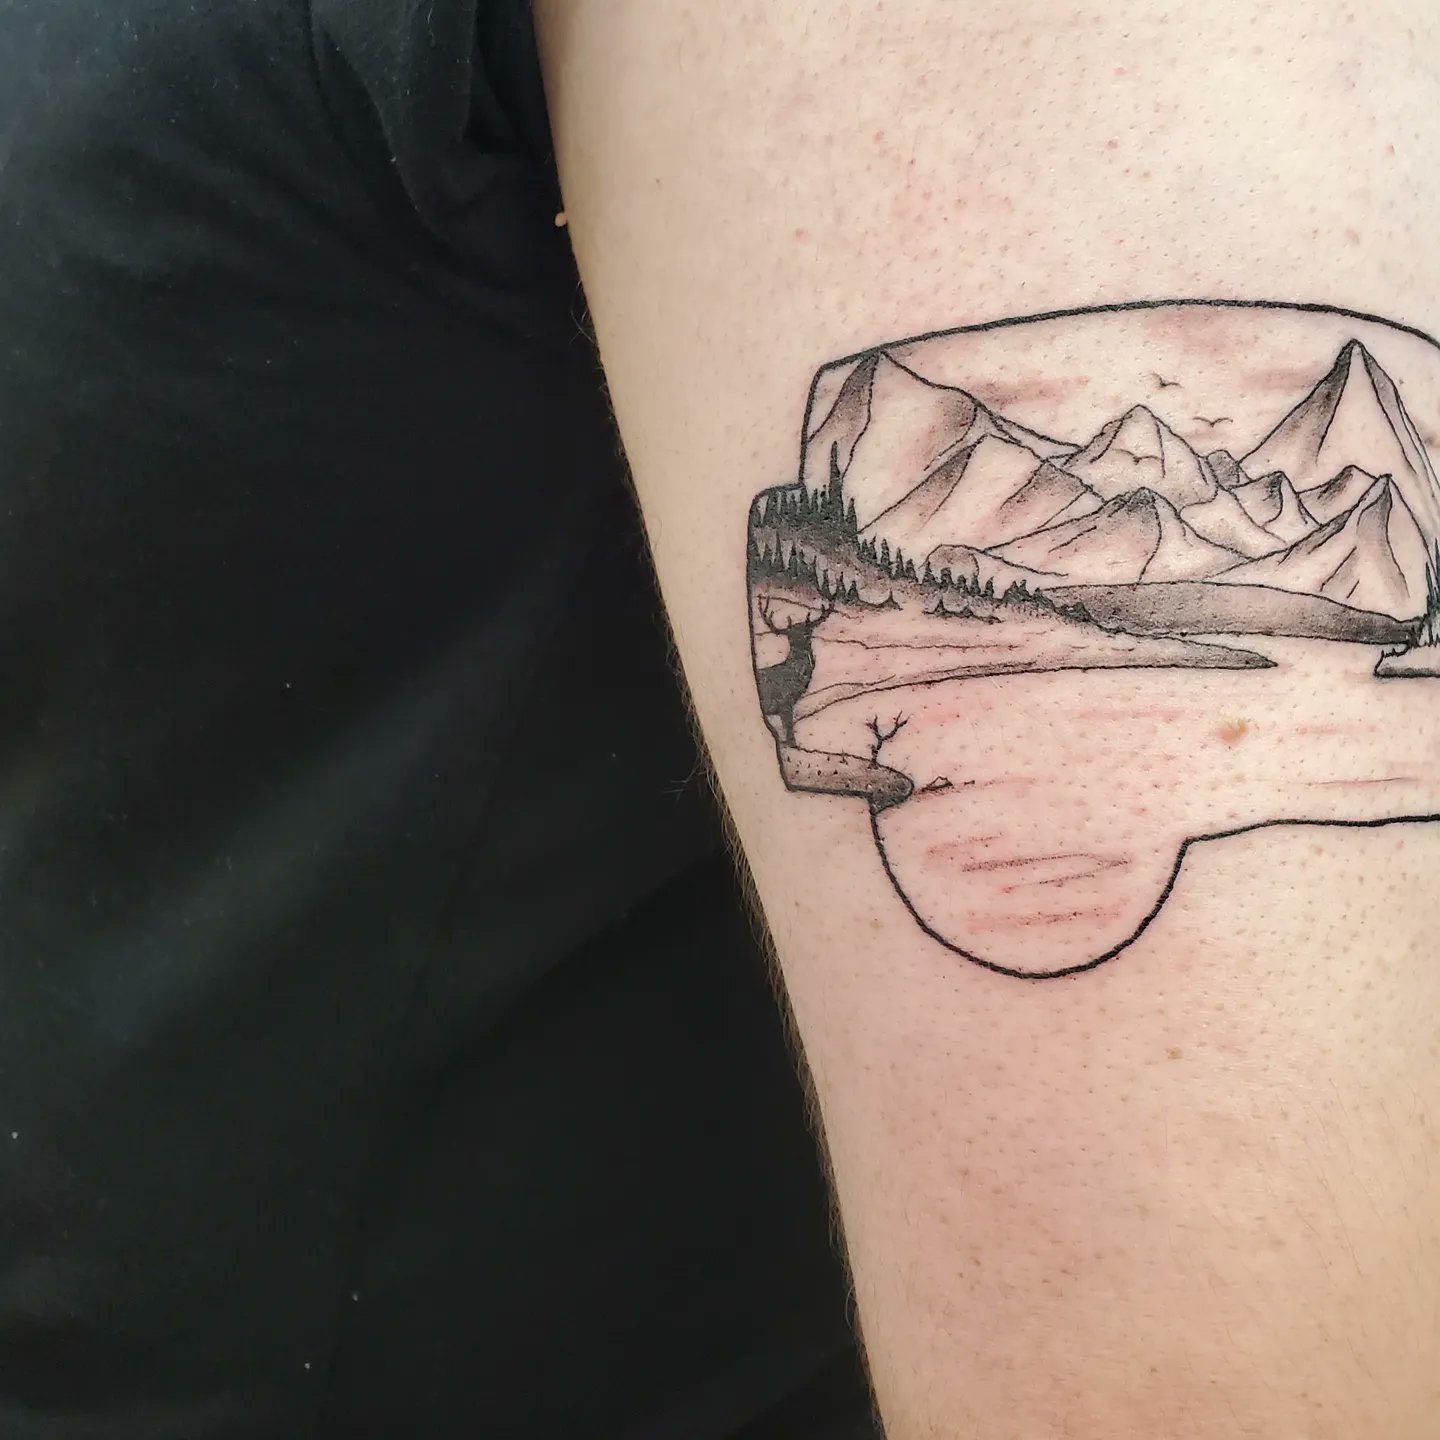 101 Best Jeep Tattoo Ideas That Will Blow Your Mind  Outsons